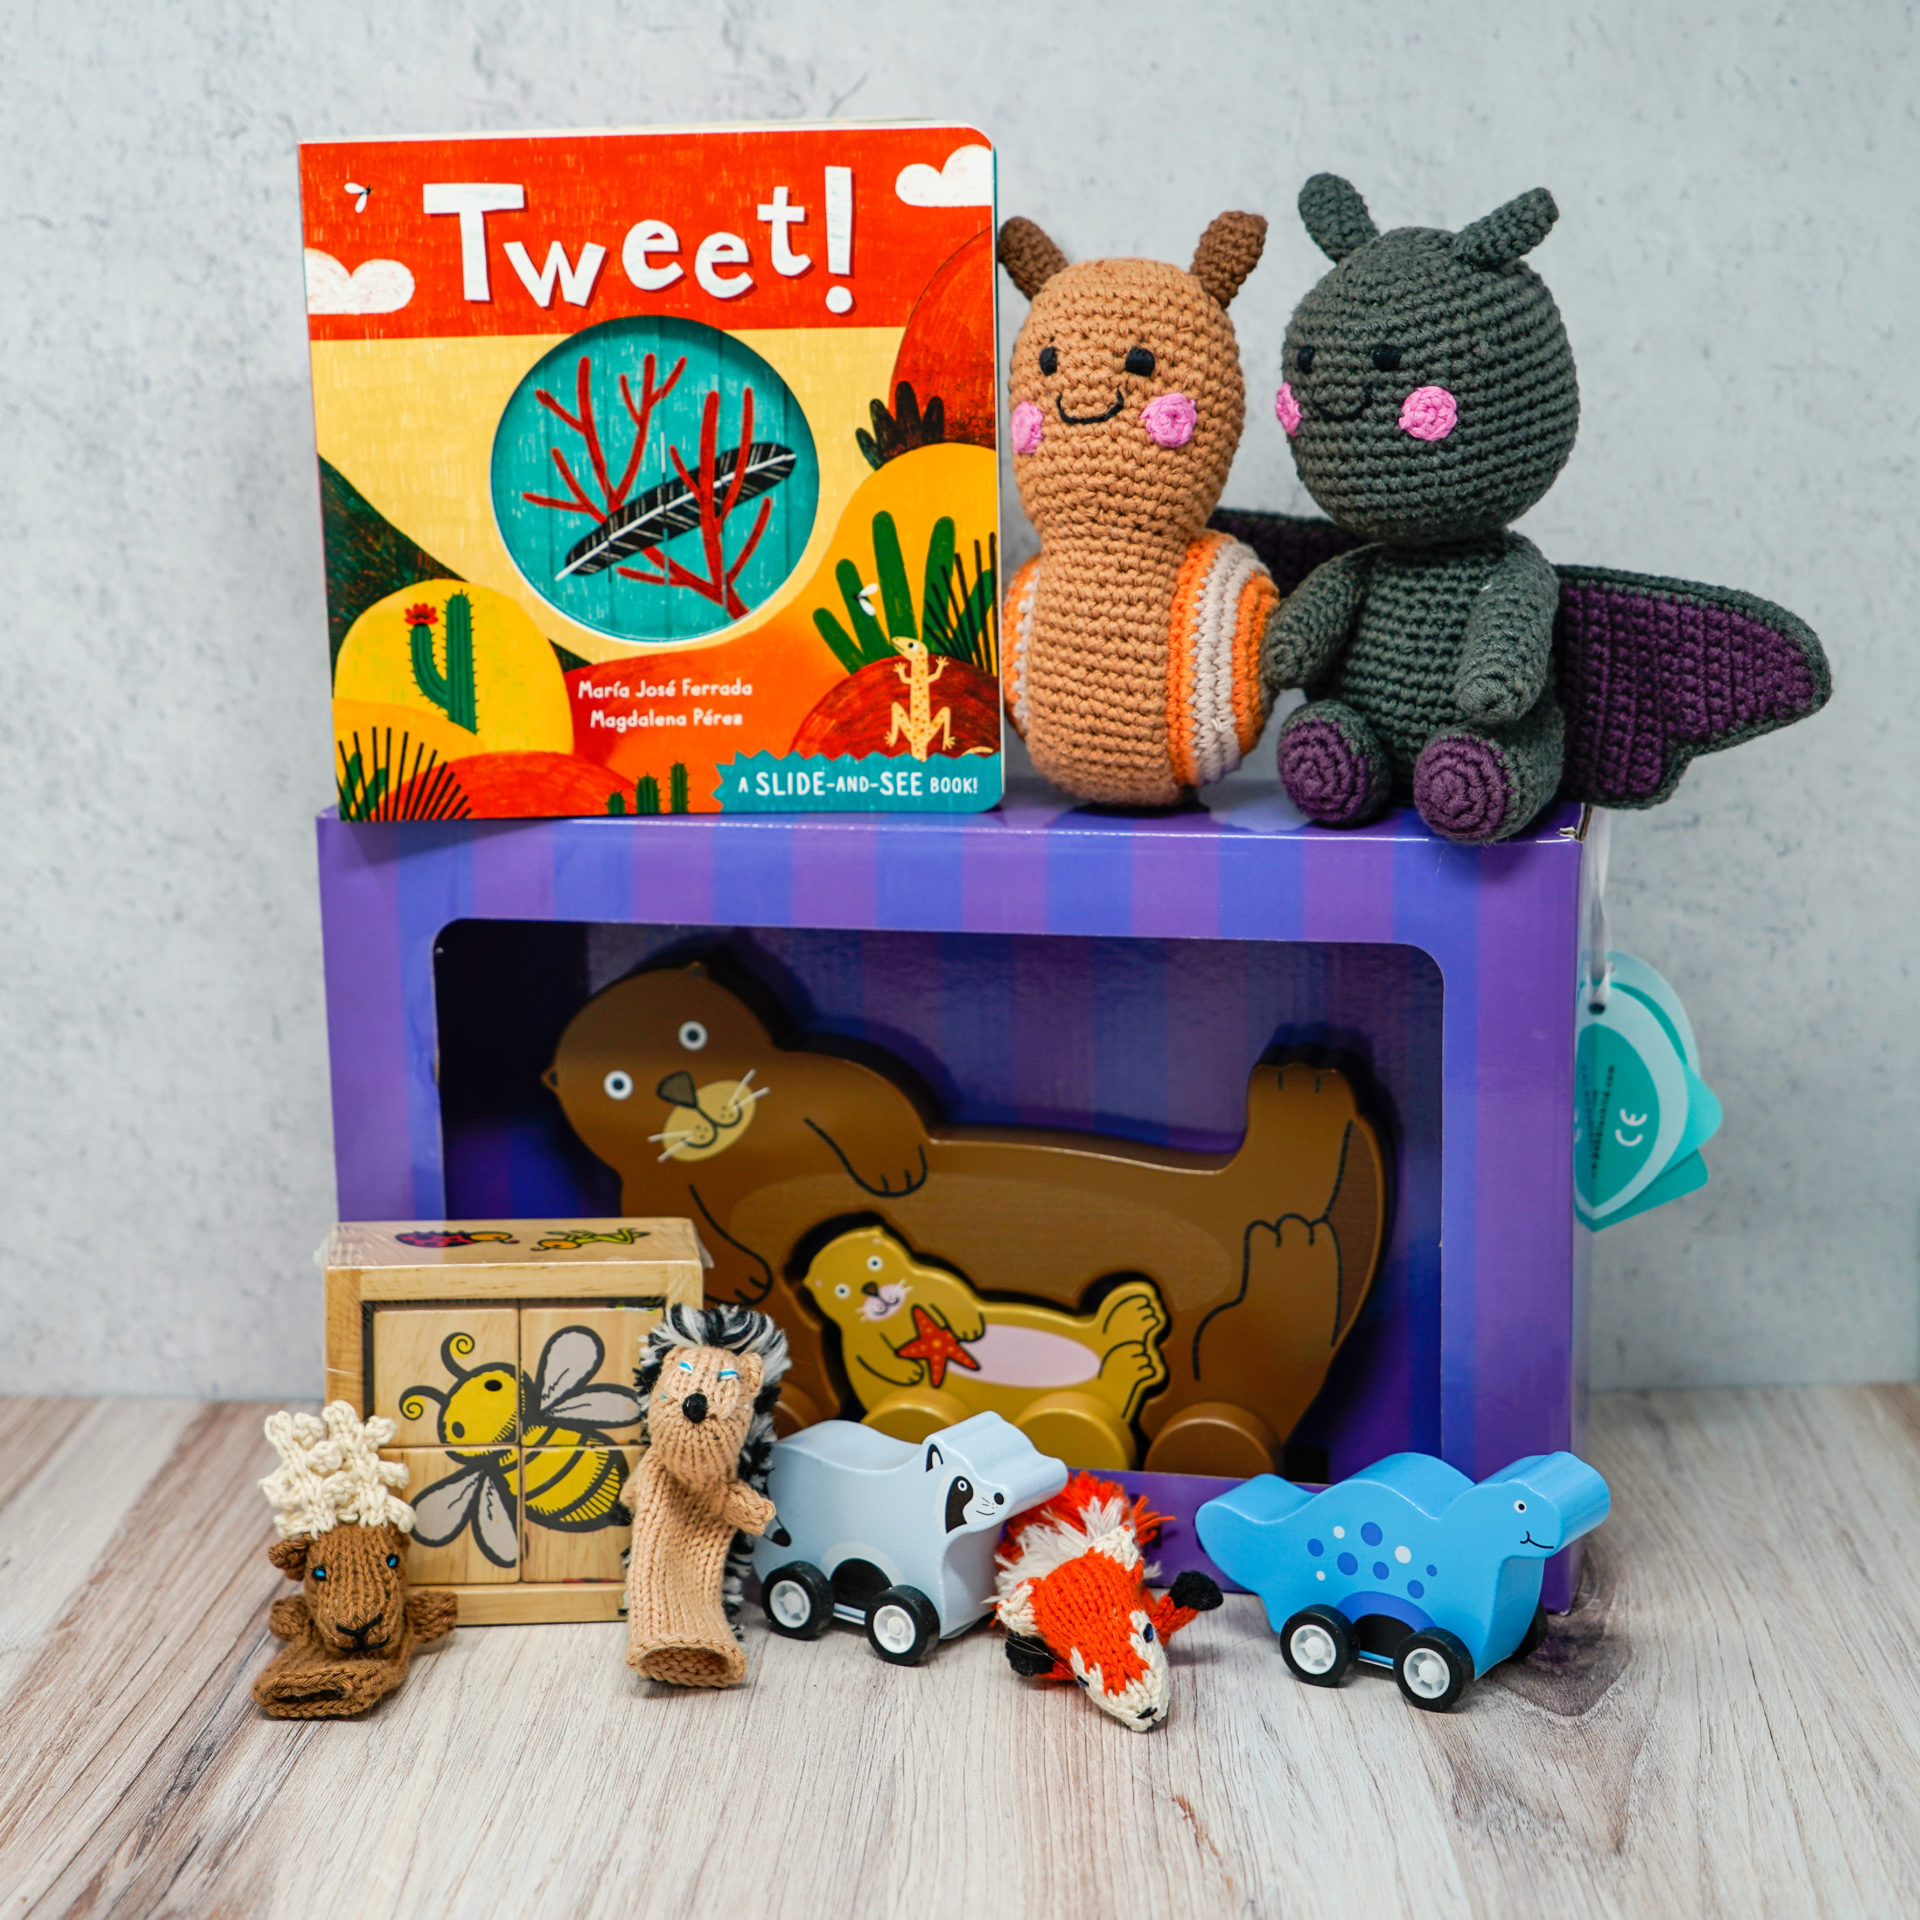 An assortment of gifts for toddlers including plush toys, finger puppets, and books